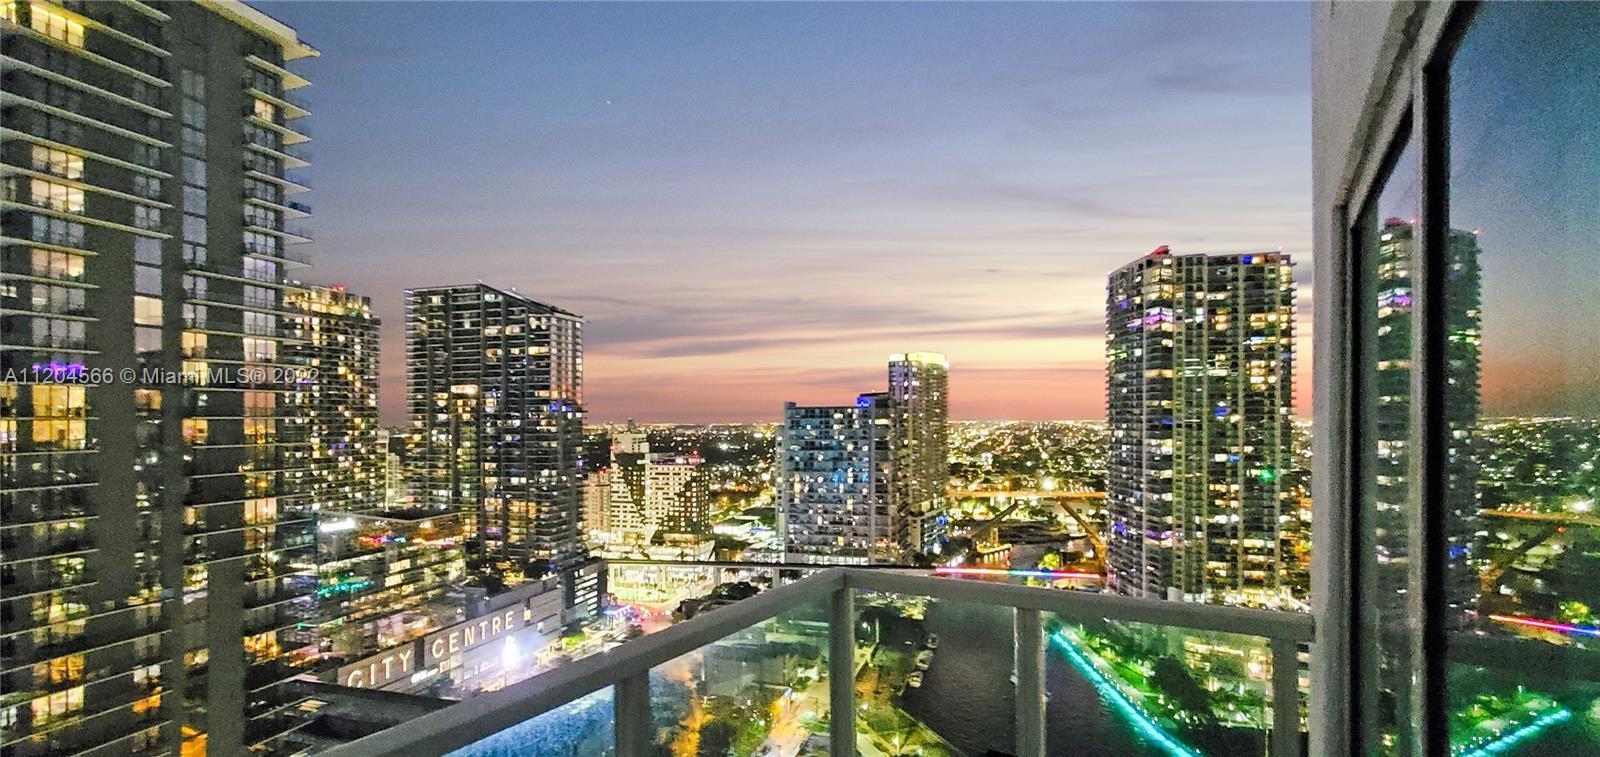 This Incredible 2 Bedroom 2 Bath Loft Apartment is a CORNER with Unobstructed views of the Brickell 